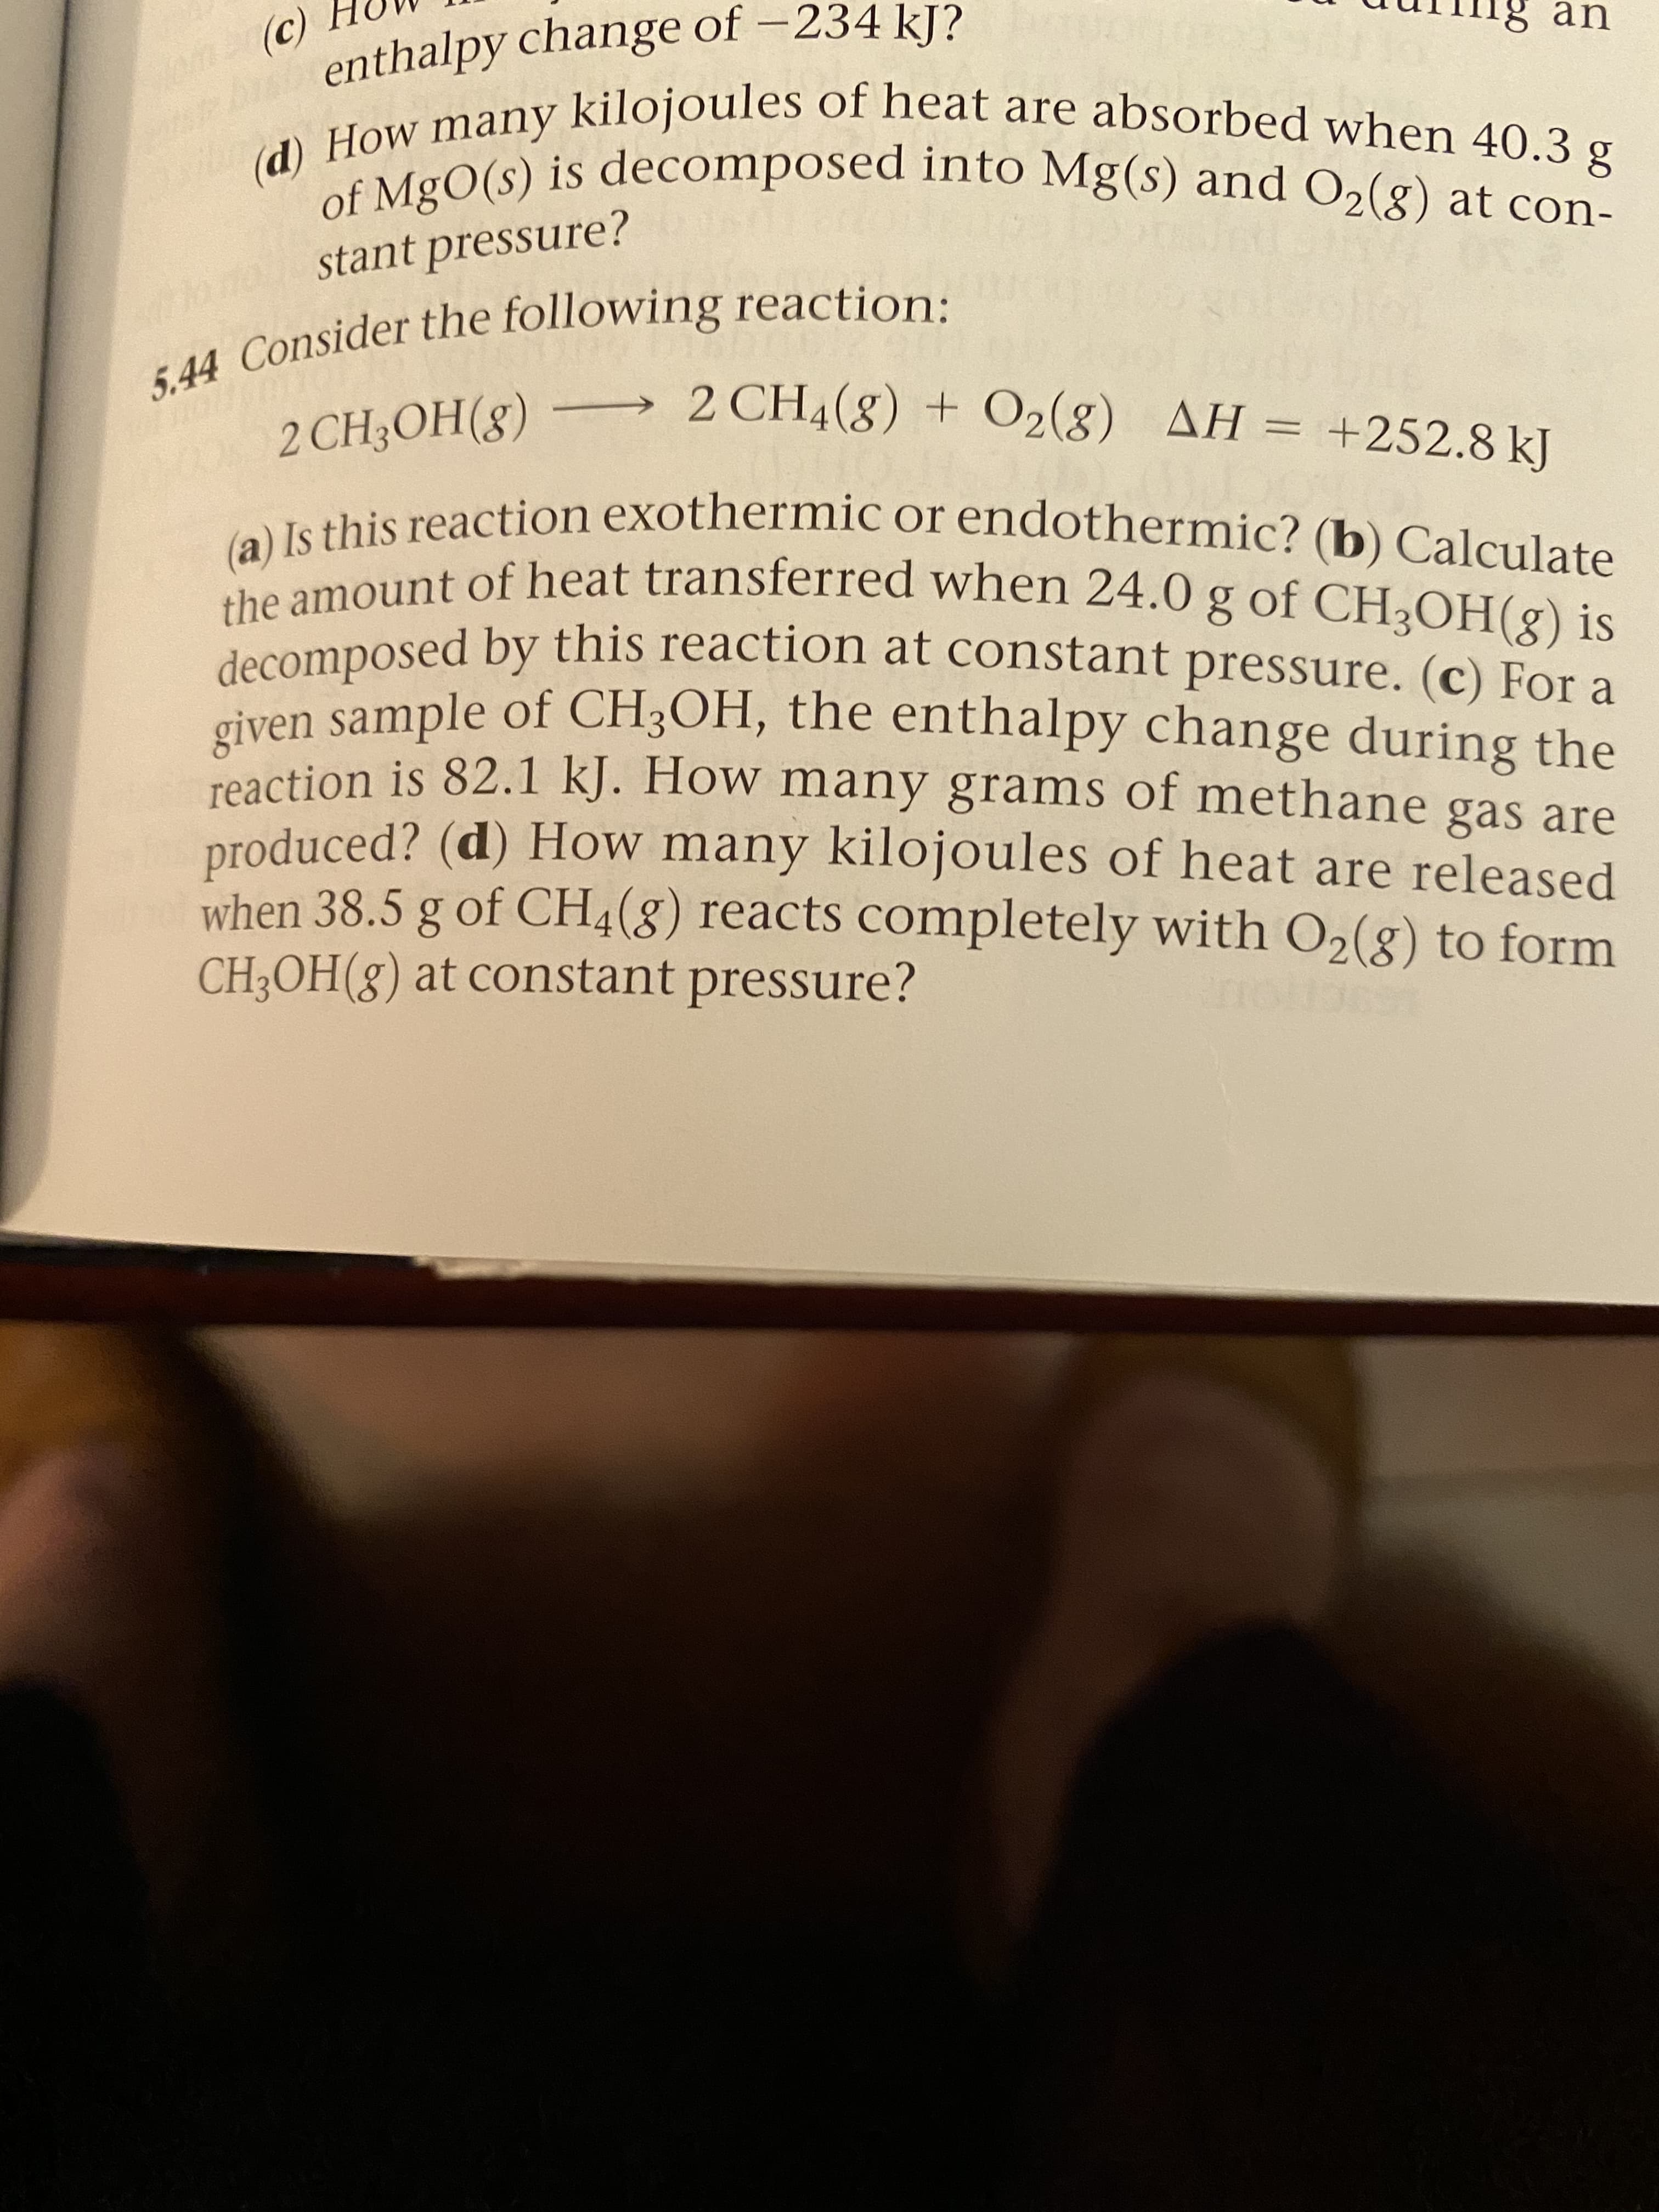 (c)
enthalpy change of -234 kJ?
an
(d) How many kilojoules of heat are absorbed when 40.3 g
of MgO(s) is decomposed into Mg(s) and O2(8) at con-
stant pressure?
5.44 Consider the following reaction:
2 CH3OH(8) – 2 CH4(8) + O2(8) AH = +252.8 kJ
(a) Is this reaction exothermic or endothermic? (b) Calculate
the amount of heat transferred when 24.0 g of CH3OH(g) is
decomposed by this reaction at constant pressure. (c) For a
given sample of CH3OH, the enthalpy change during the
reaction is 82.1 kJ. How many grams of methane gas are
produced? (d) How many kilojoules of heat are released
when 38.5 g of CH4(g) reacts completely with O2(g) to form
CH3OH(g) at constant pressure?
